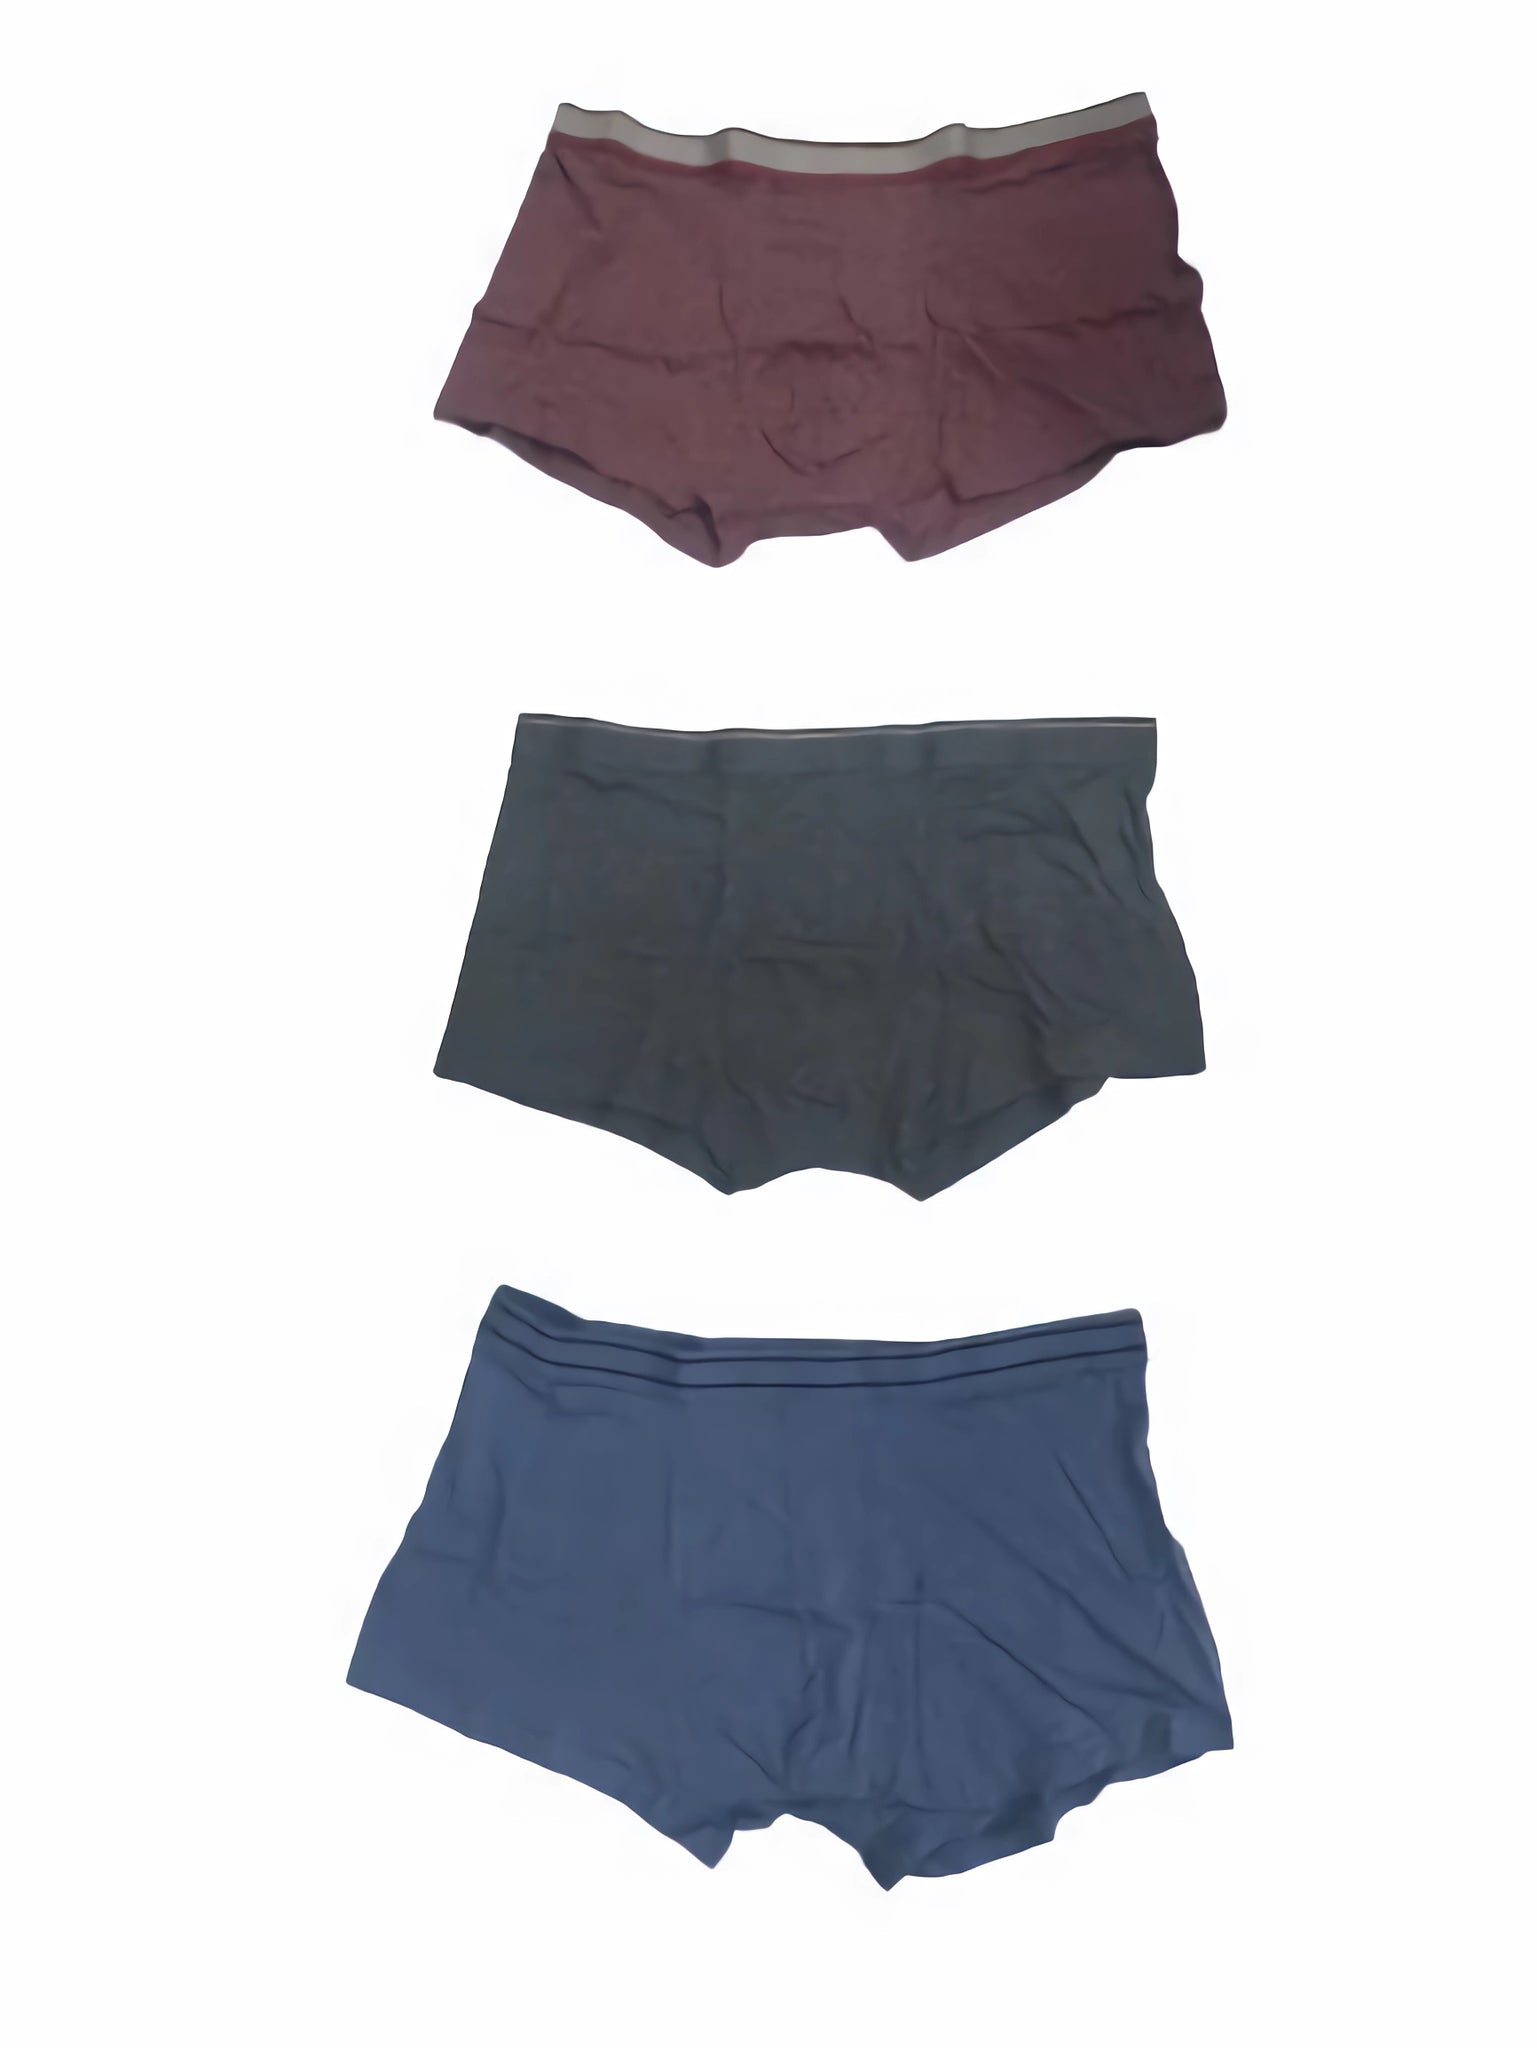 M&S 3 Pack Mens Boxers  - Size 2XL